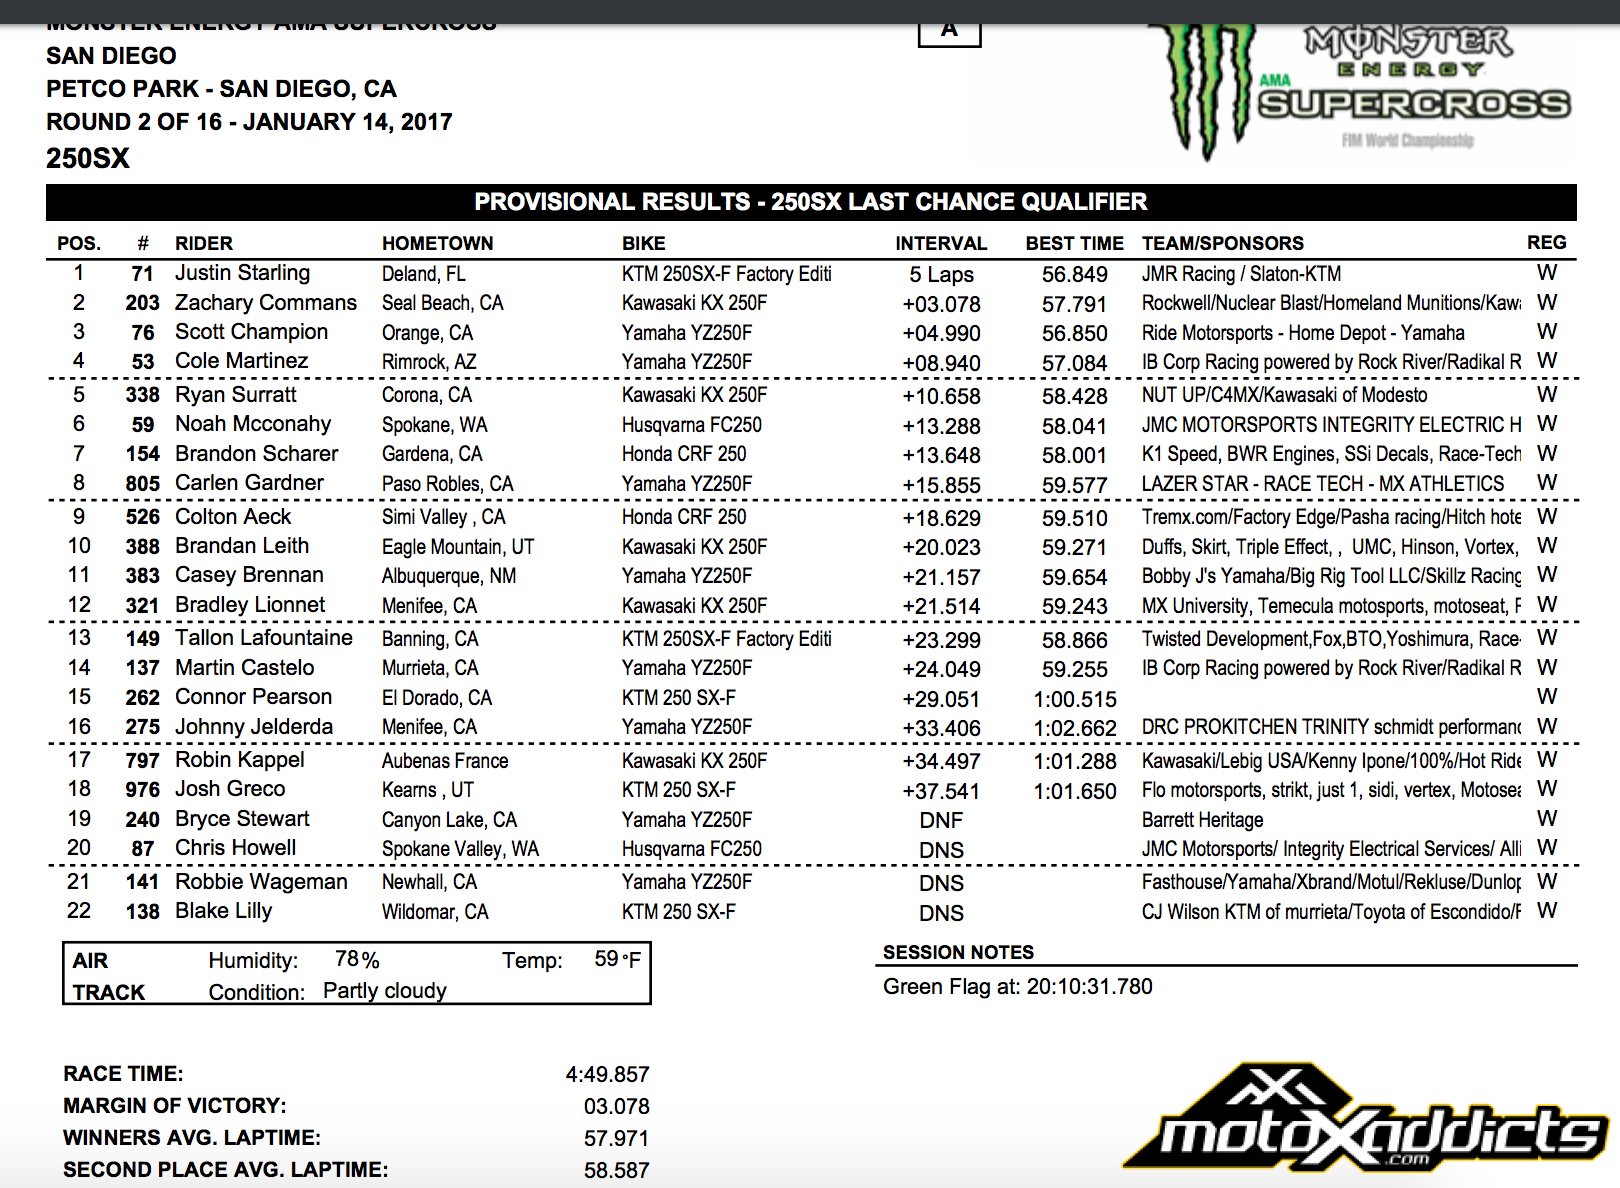 250SX LCQ Results - 2017 San Diego SX - Click to Enlarge